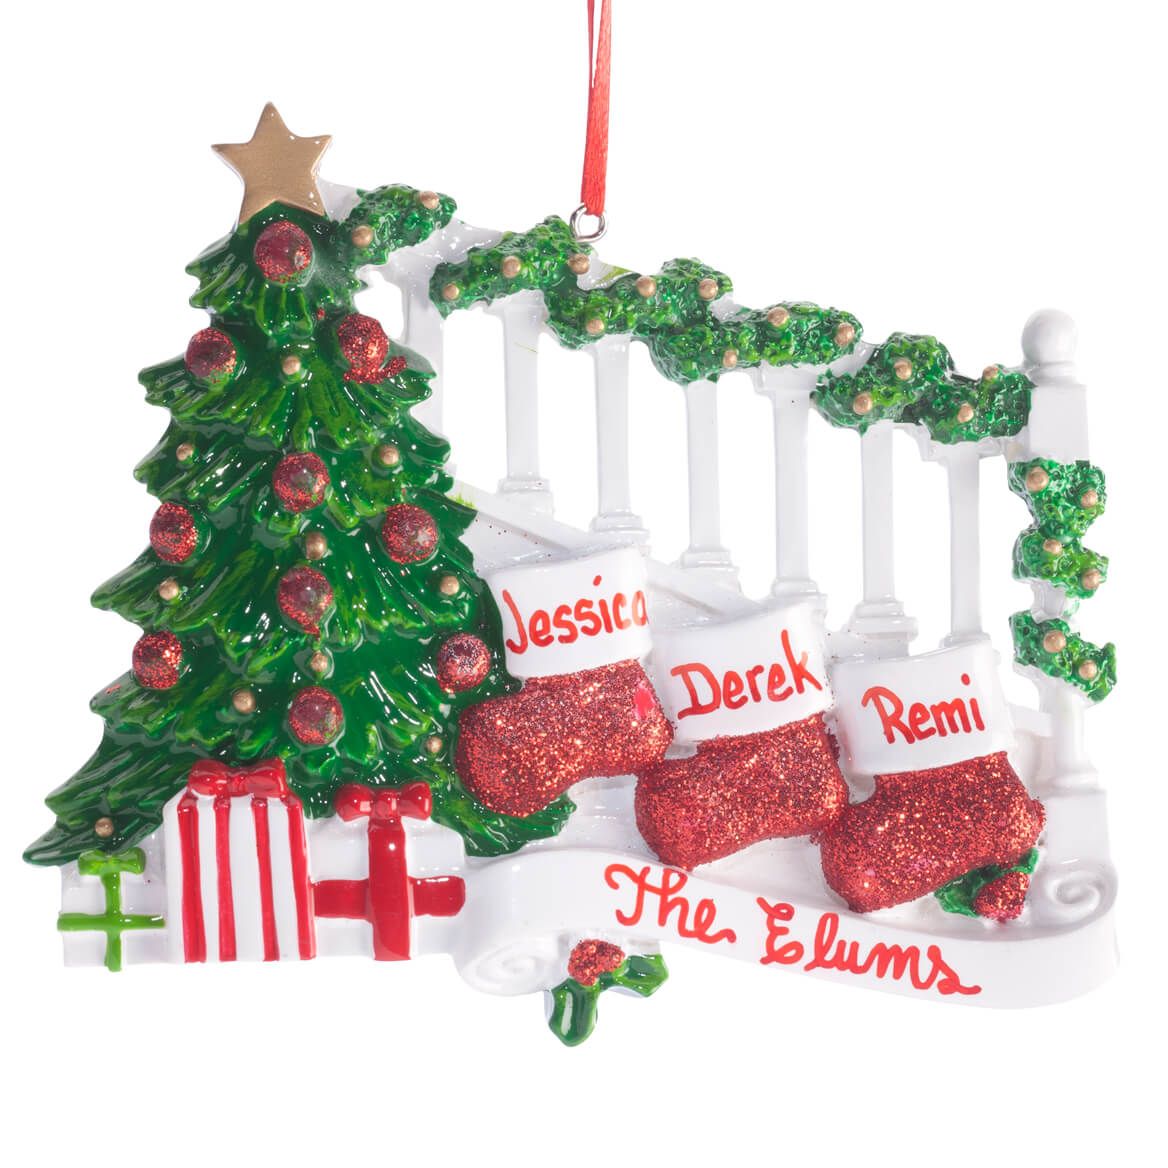 Personalized Stockings on Stairs Family Ornament + '-' + 360614